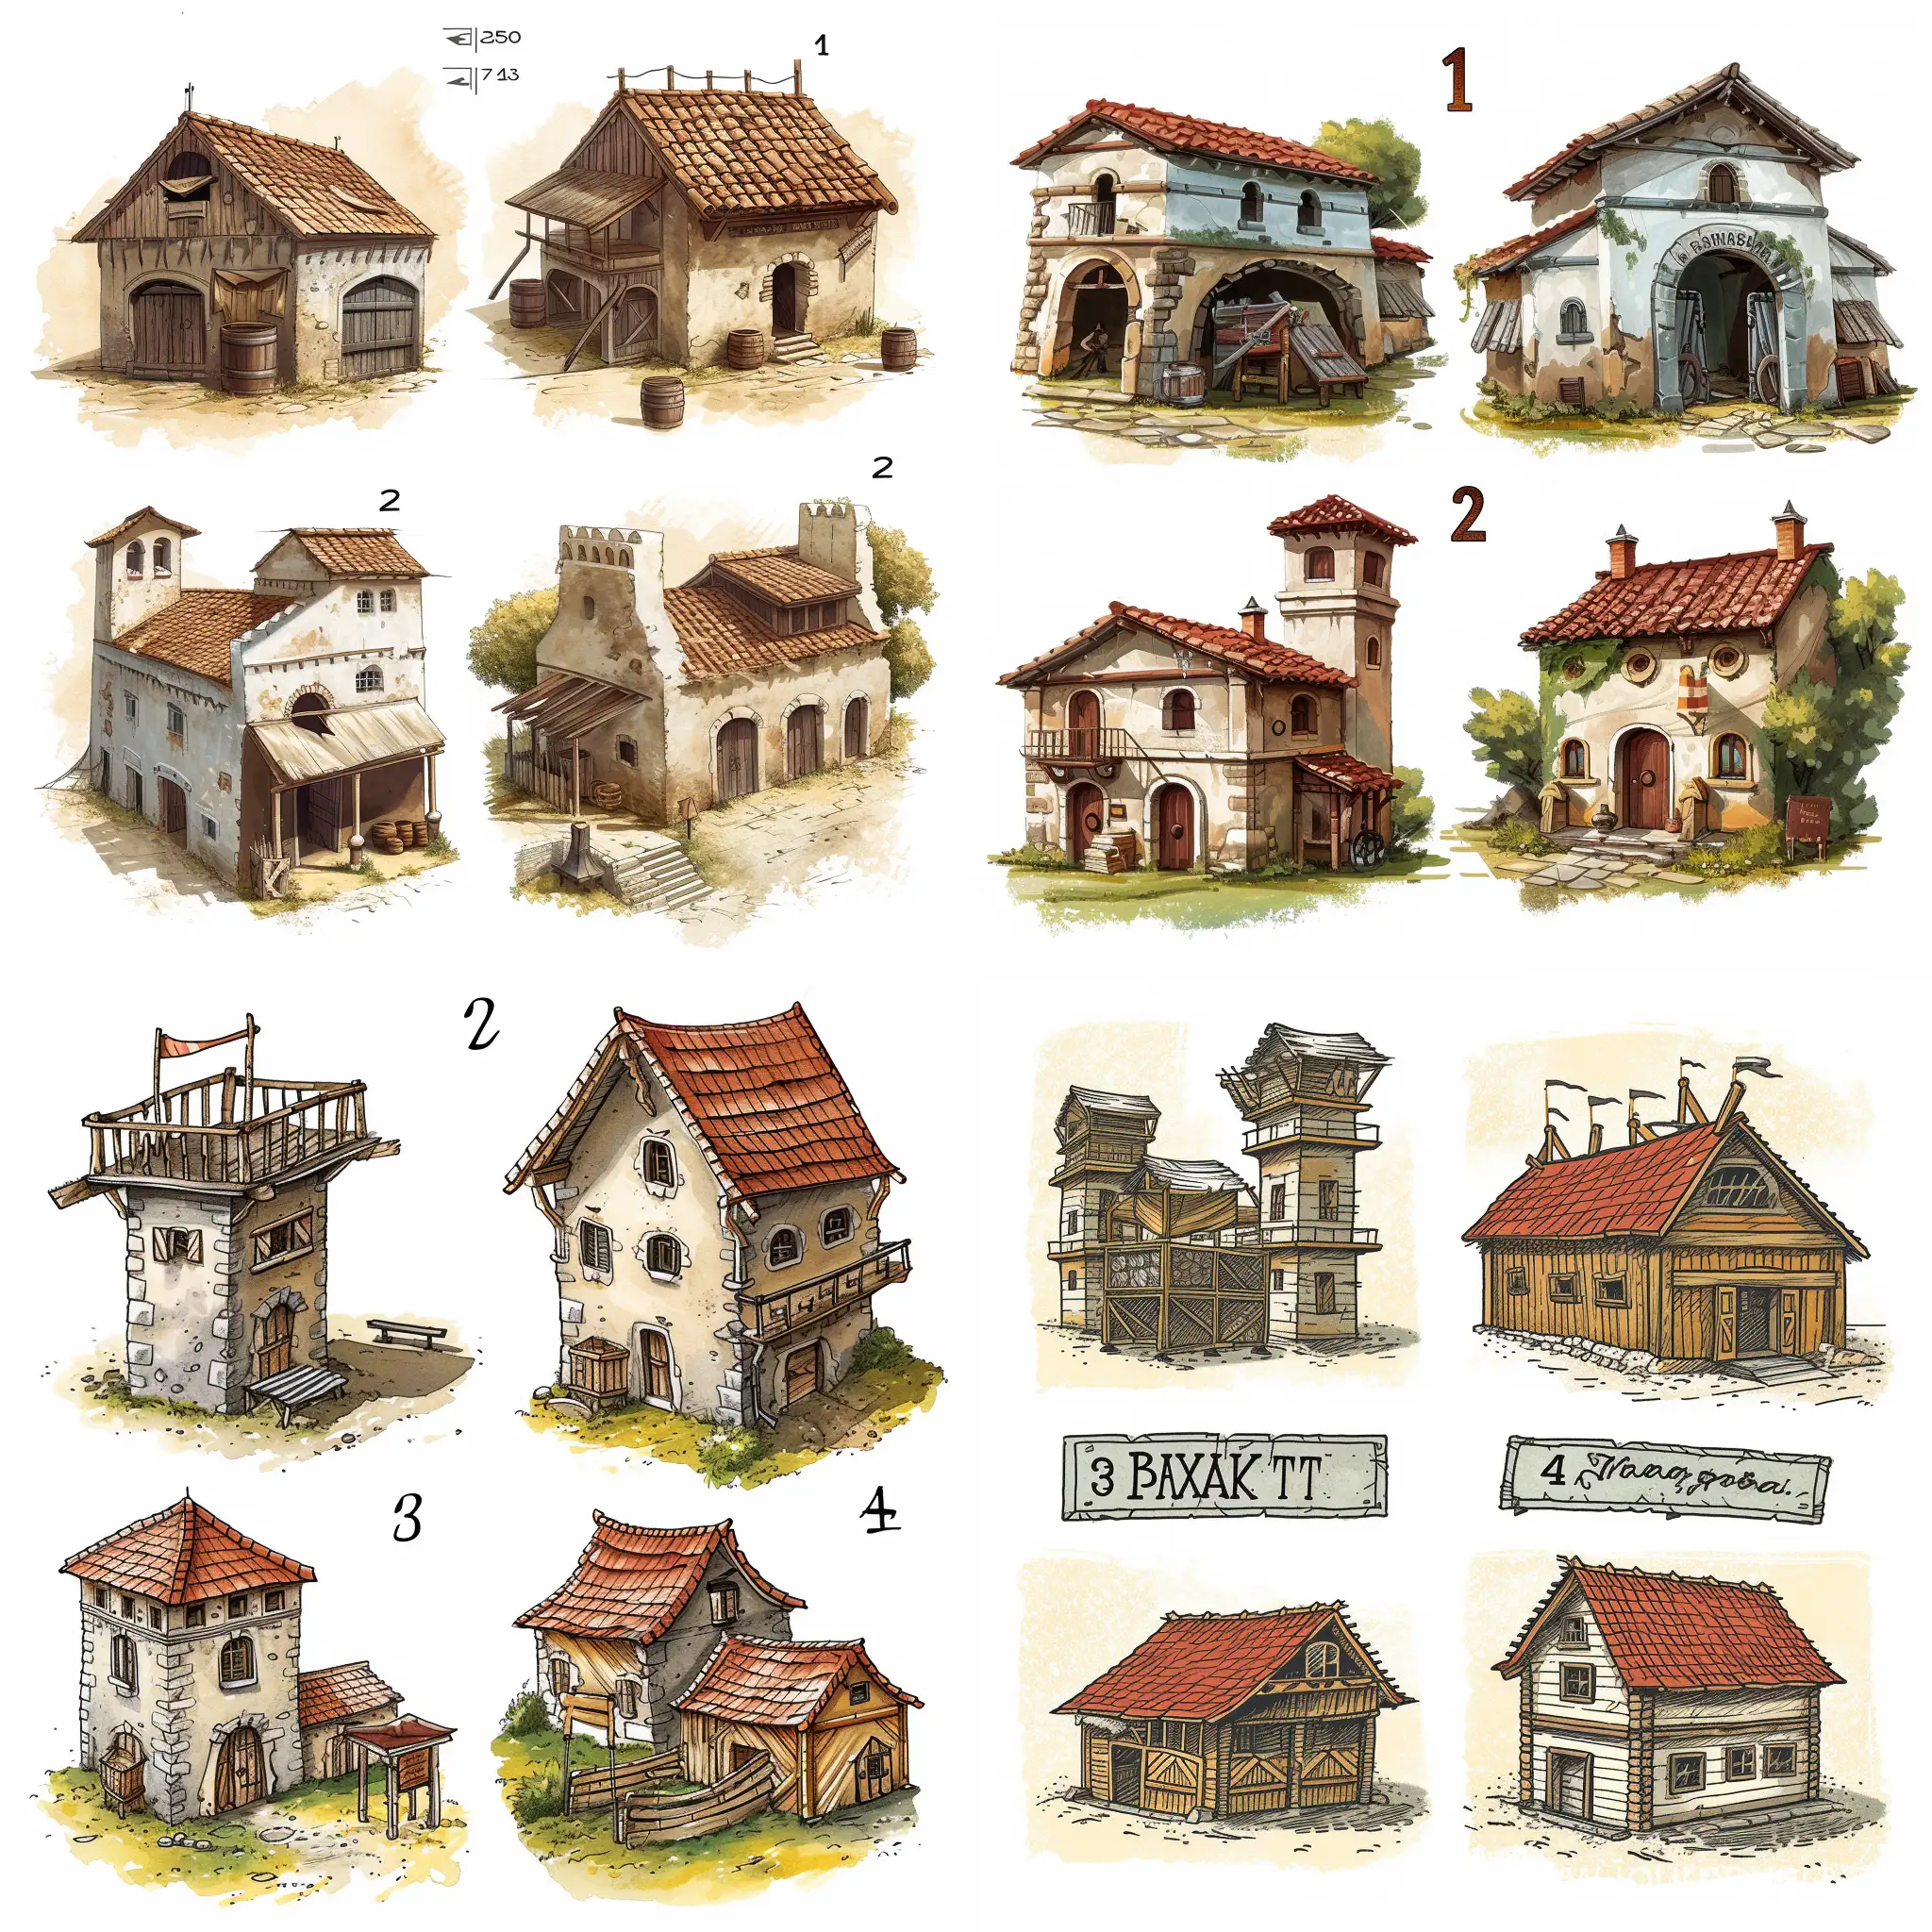 generate 4 assets for the board game: 1 is the barracks, 2 is the main building. 3 - the market. 4 - an ordinary resident's house. Draw everything in the style of hand paint.